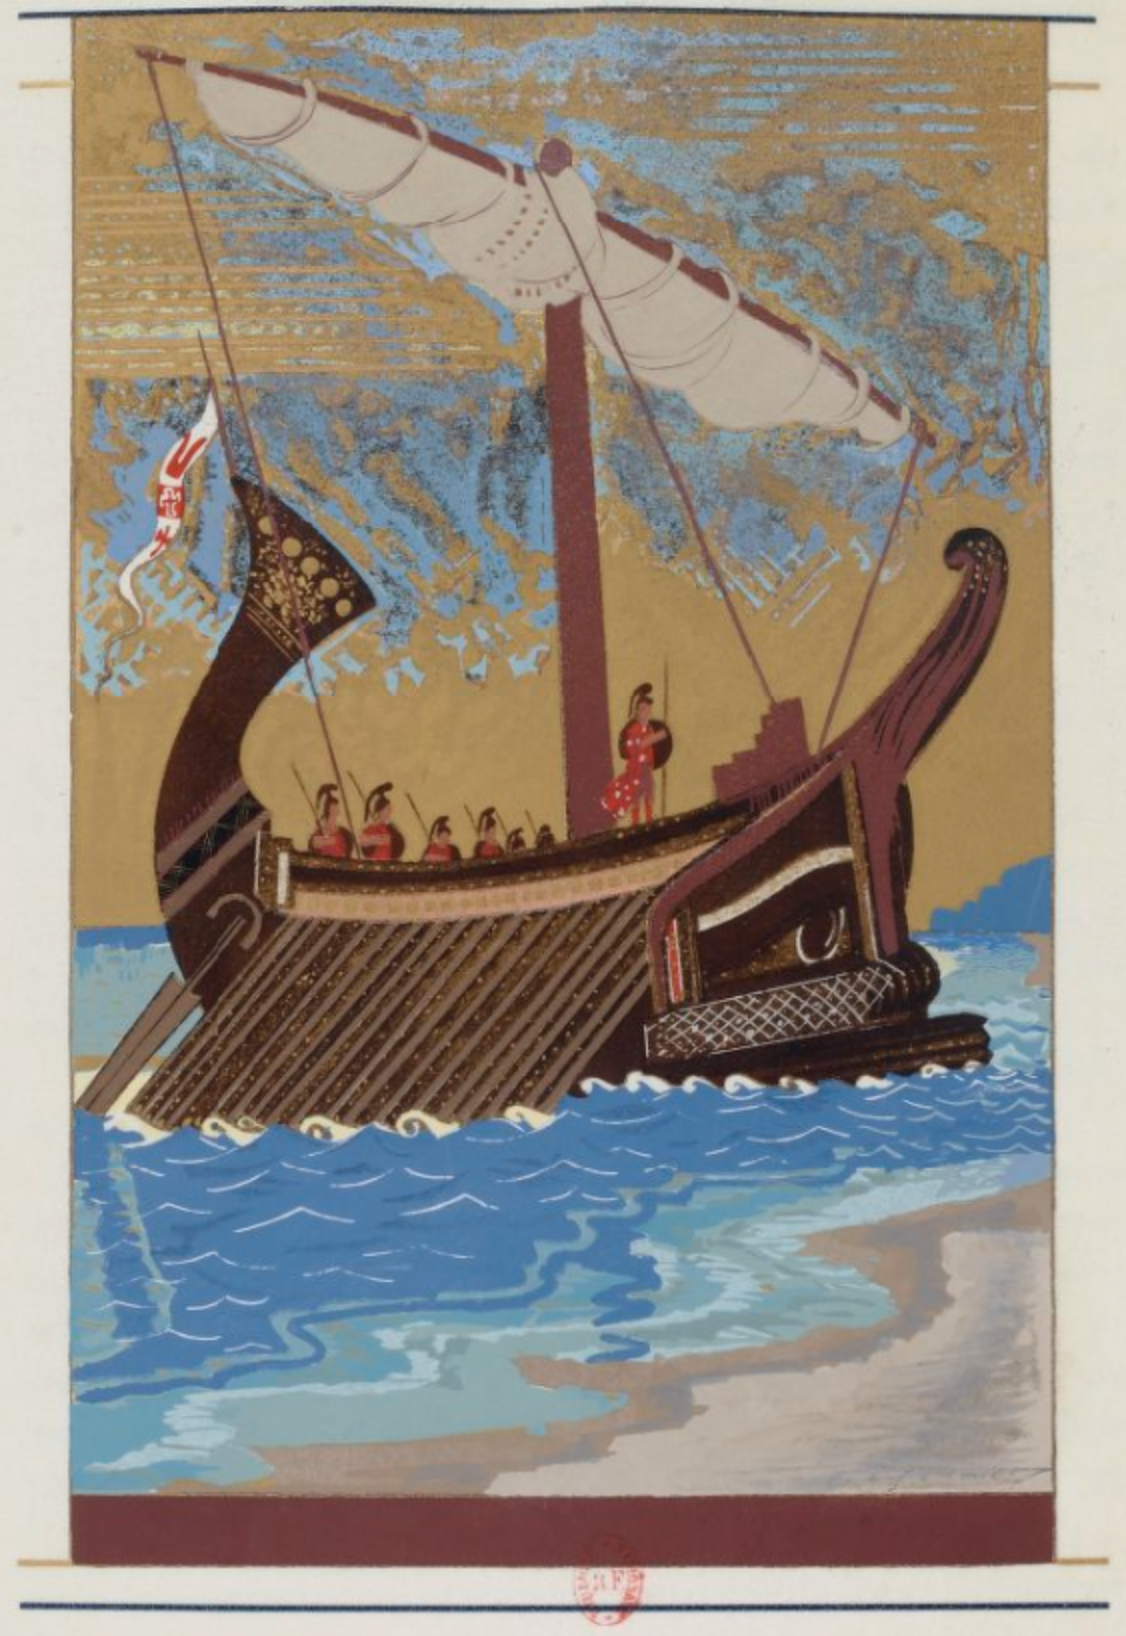 A bold colour illustration of a large wooden sail boat on bright blue water coming to shore.